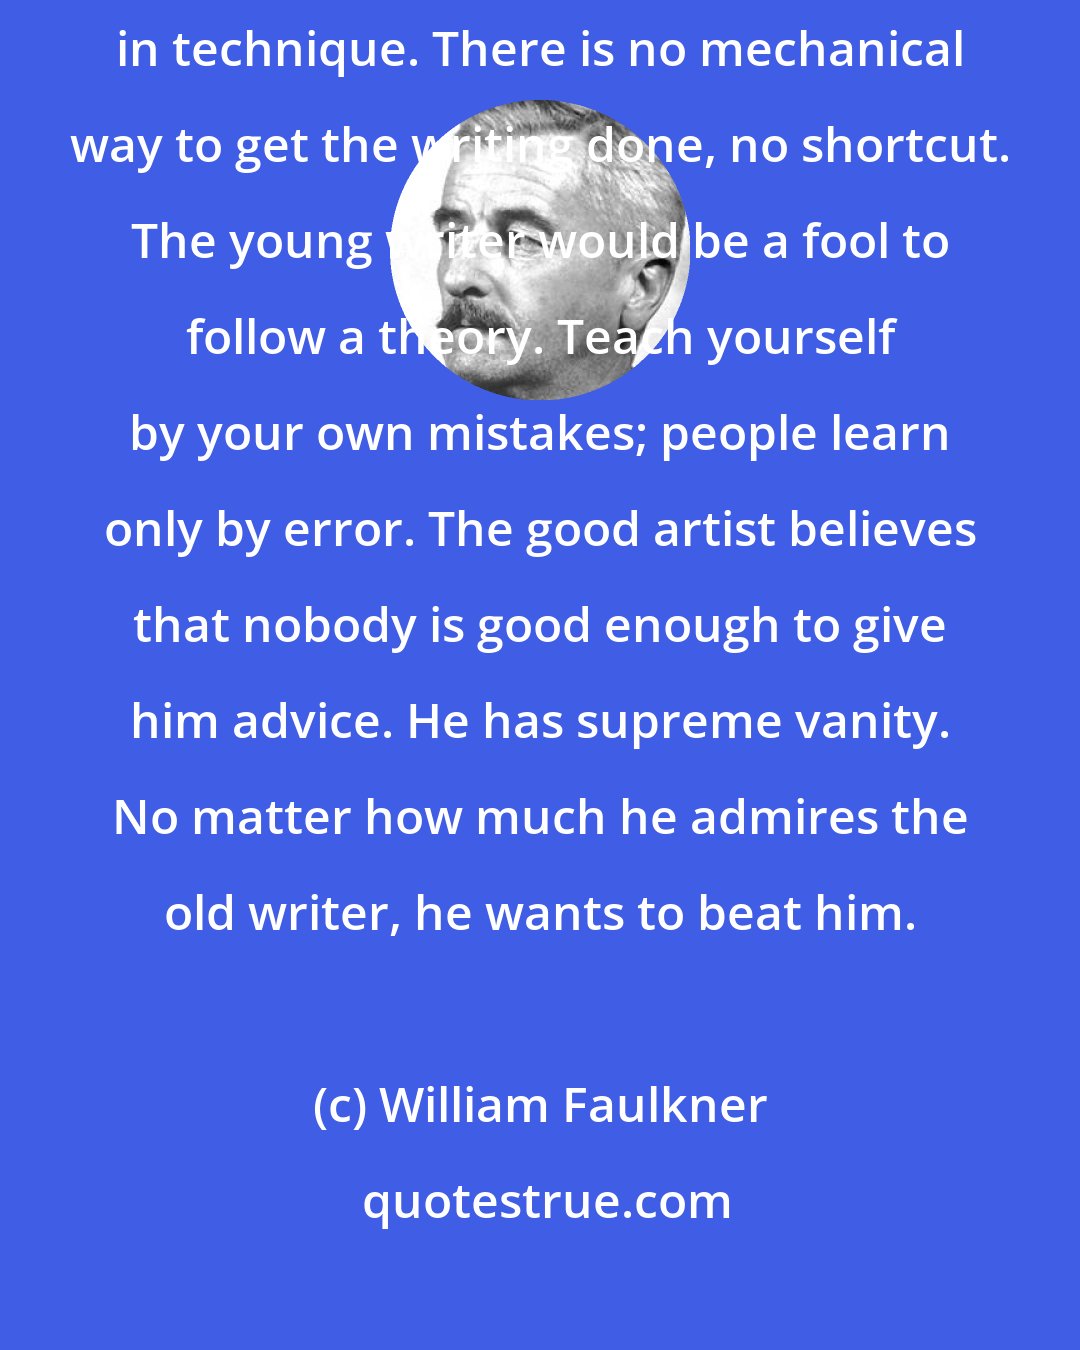 William Faulkner: Let the writer take up surgery or bricklaying if he is interested in technique. There is no mechanical way to get the writing done, no shortcut. The young writer would be a fool to follow a theory. Teach yourself by your own mistakes; people learn only by error. The good artist believes that nobody is good enough to give him advice. He has supreme vanity. No matter how much he admires the old writer, he wants to beat him.